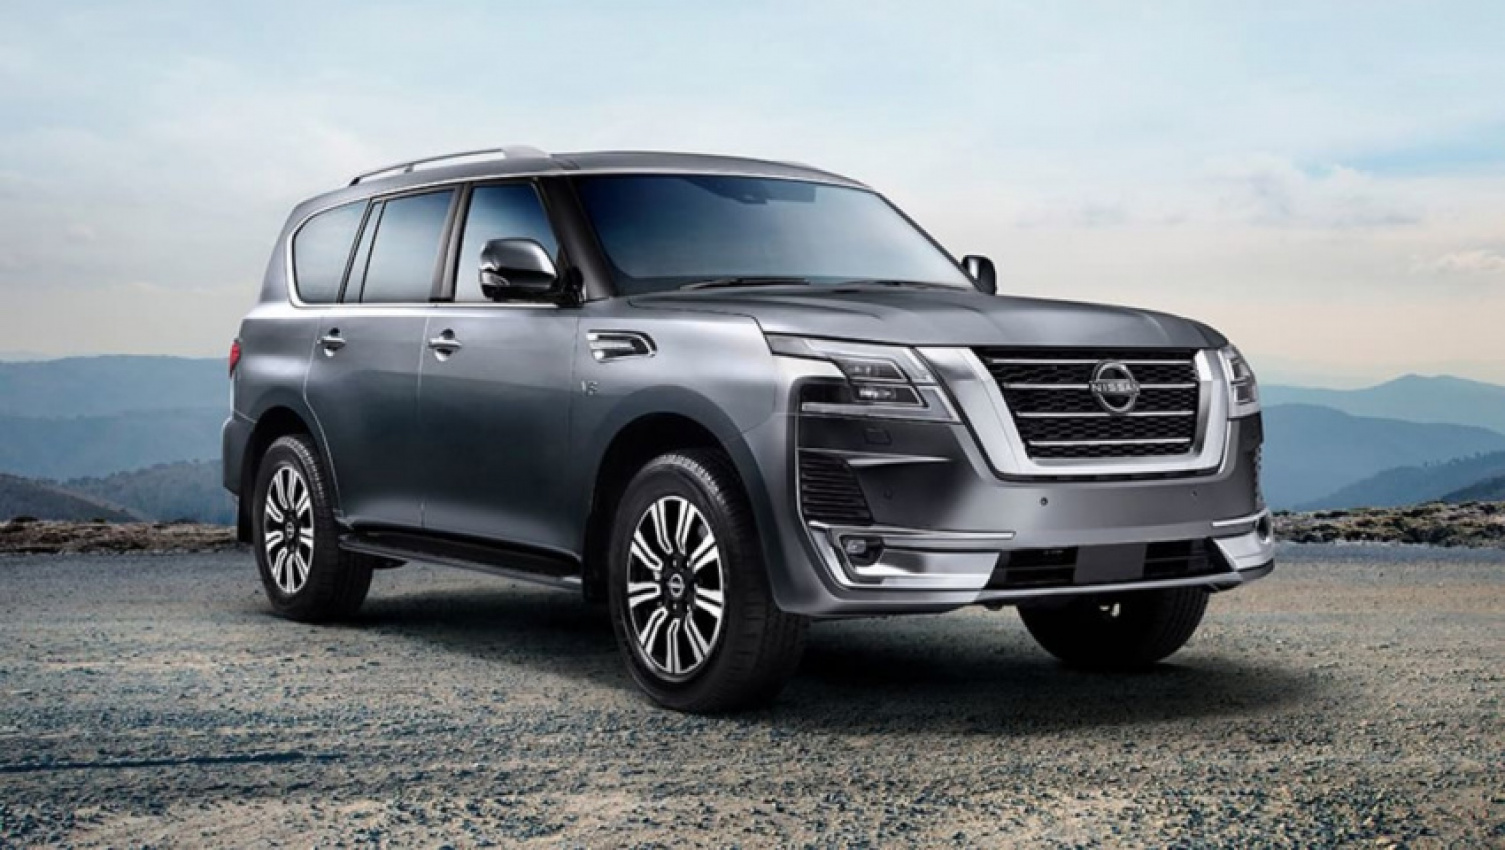 autos, cars, nissan, toyota, industry news, nissan news, nissan patrol, nissan patrol 2022, nissan suv range, showroom news, 2022 nissan patrol puts lc300 on notice with new update: price and features detailed for v8-powered toyota landcruiser 300 series rival's latest upgrade